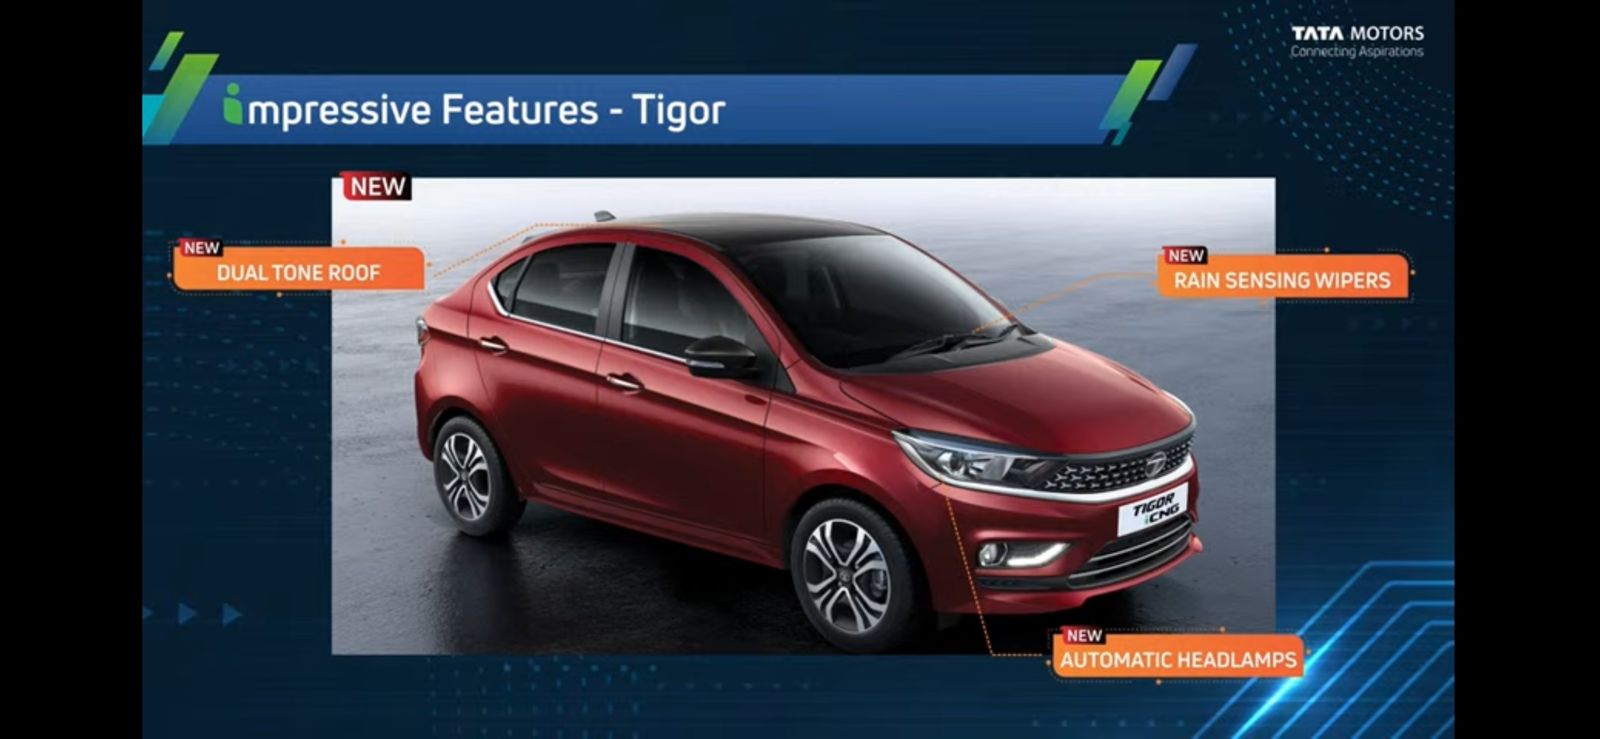 <p>The Tata Tigor too comes with a host of amazing exterior features</p>